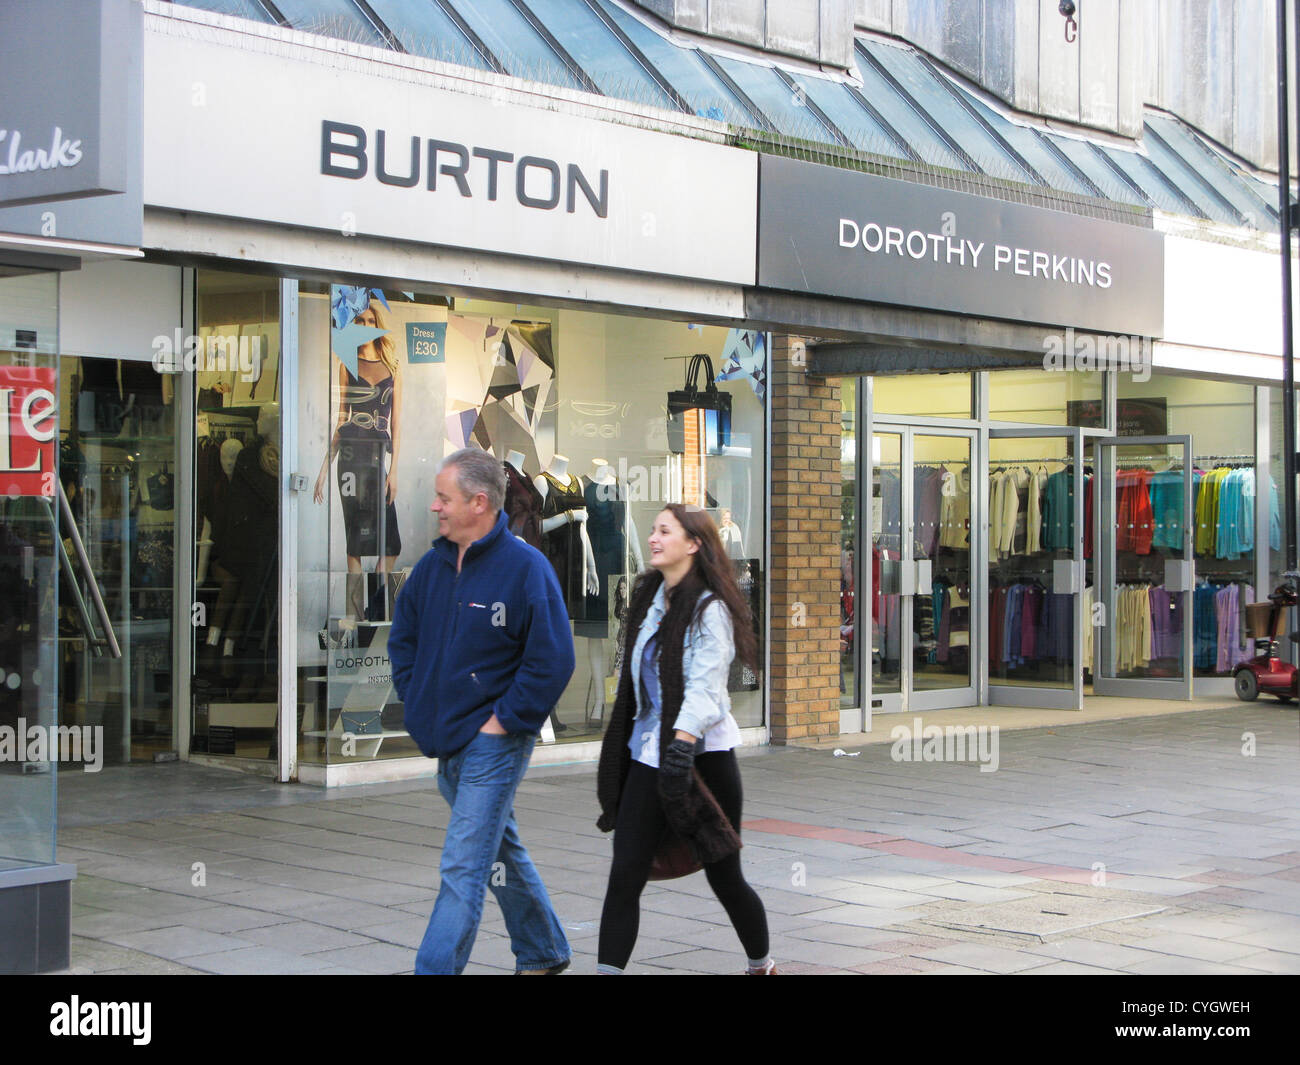 Burton Clothing Shop High Resolution Stock Photography and Images - Alamy